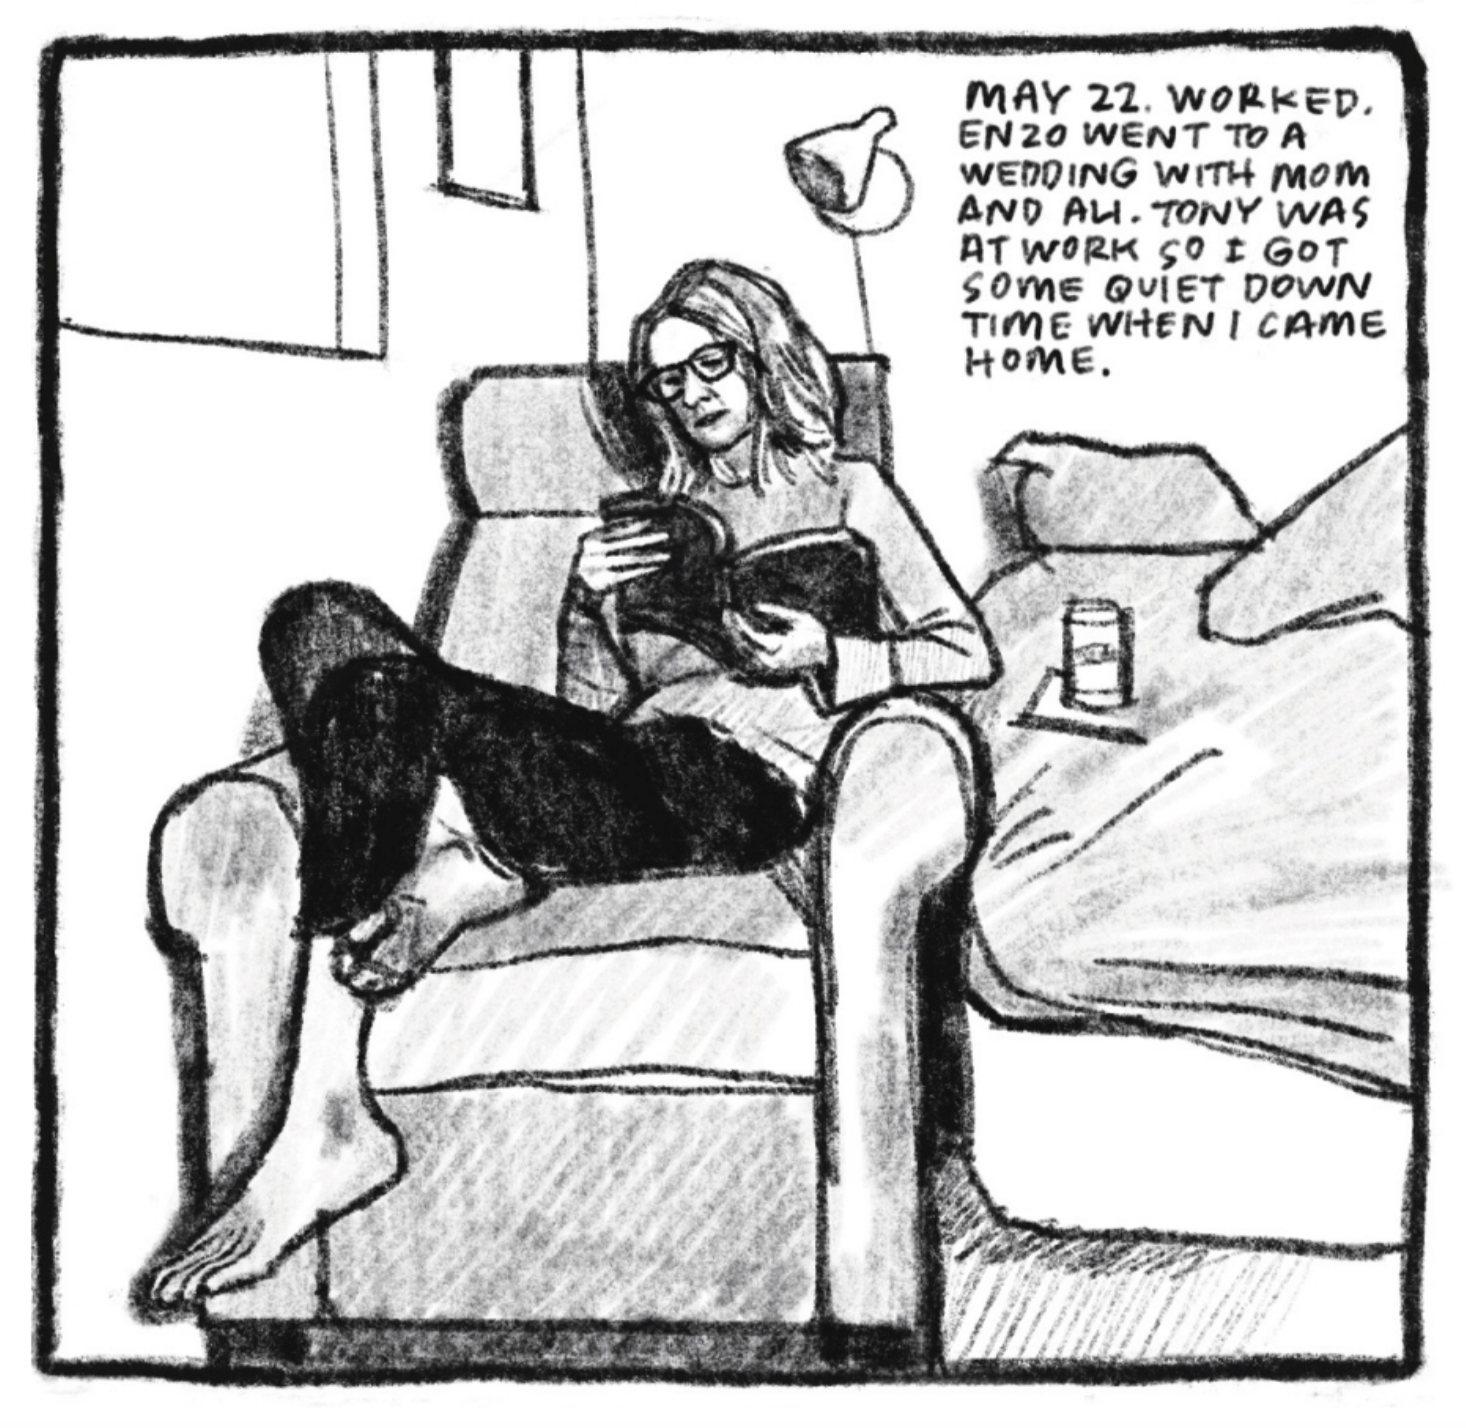 Kim lounges in an armchair reading a book. She wears glasses and comfy clothes. 
"May 22. Worked. Enzo went to a wedding with Mom and Ali. Tony was at work so I got some quiet down time when I came home."